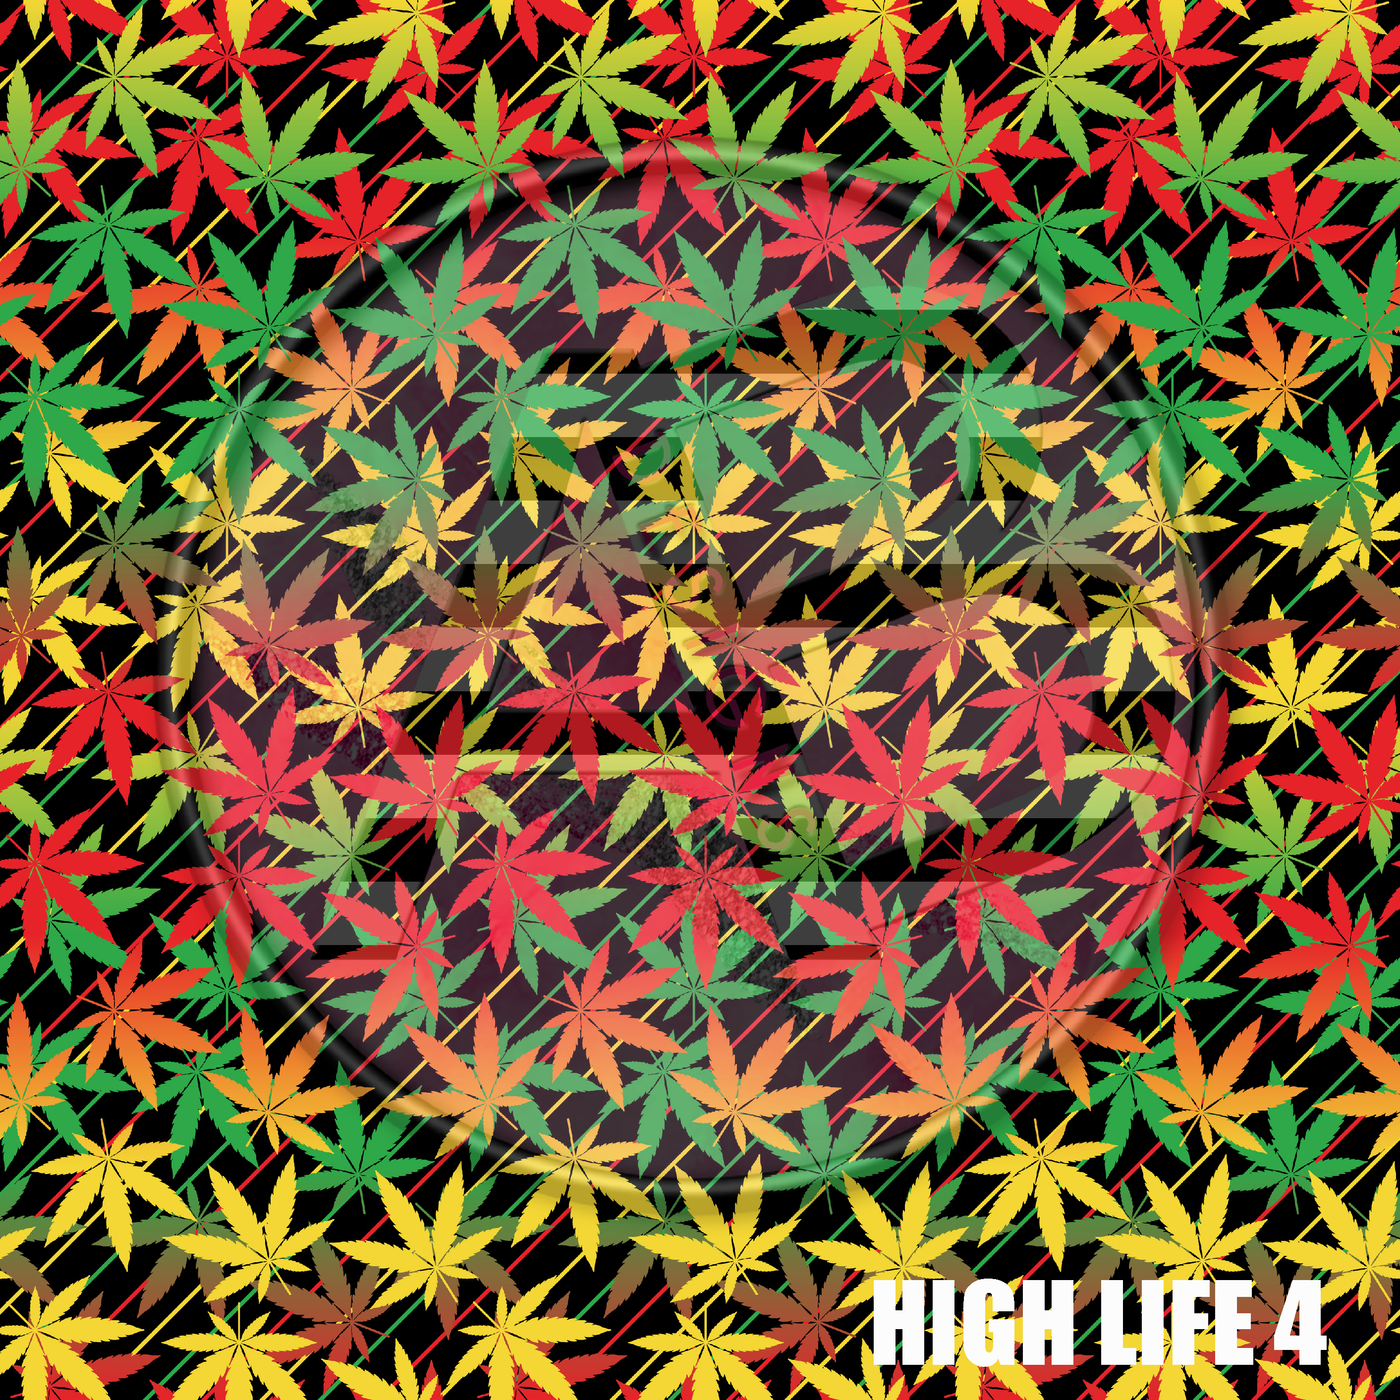 Adhesive Patterned Vinyl - High Life 4